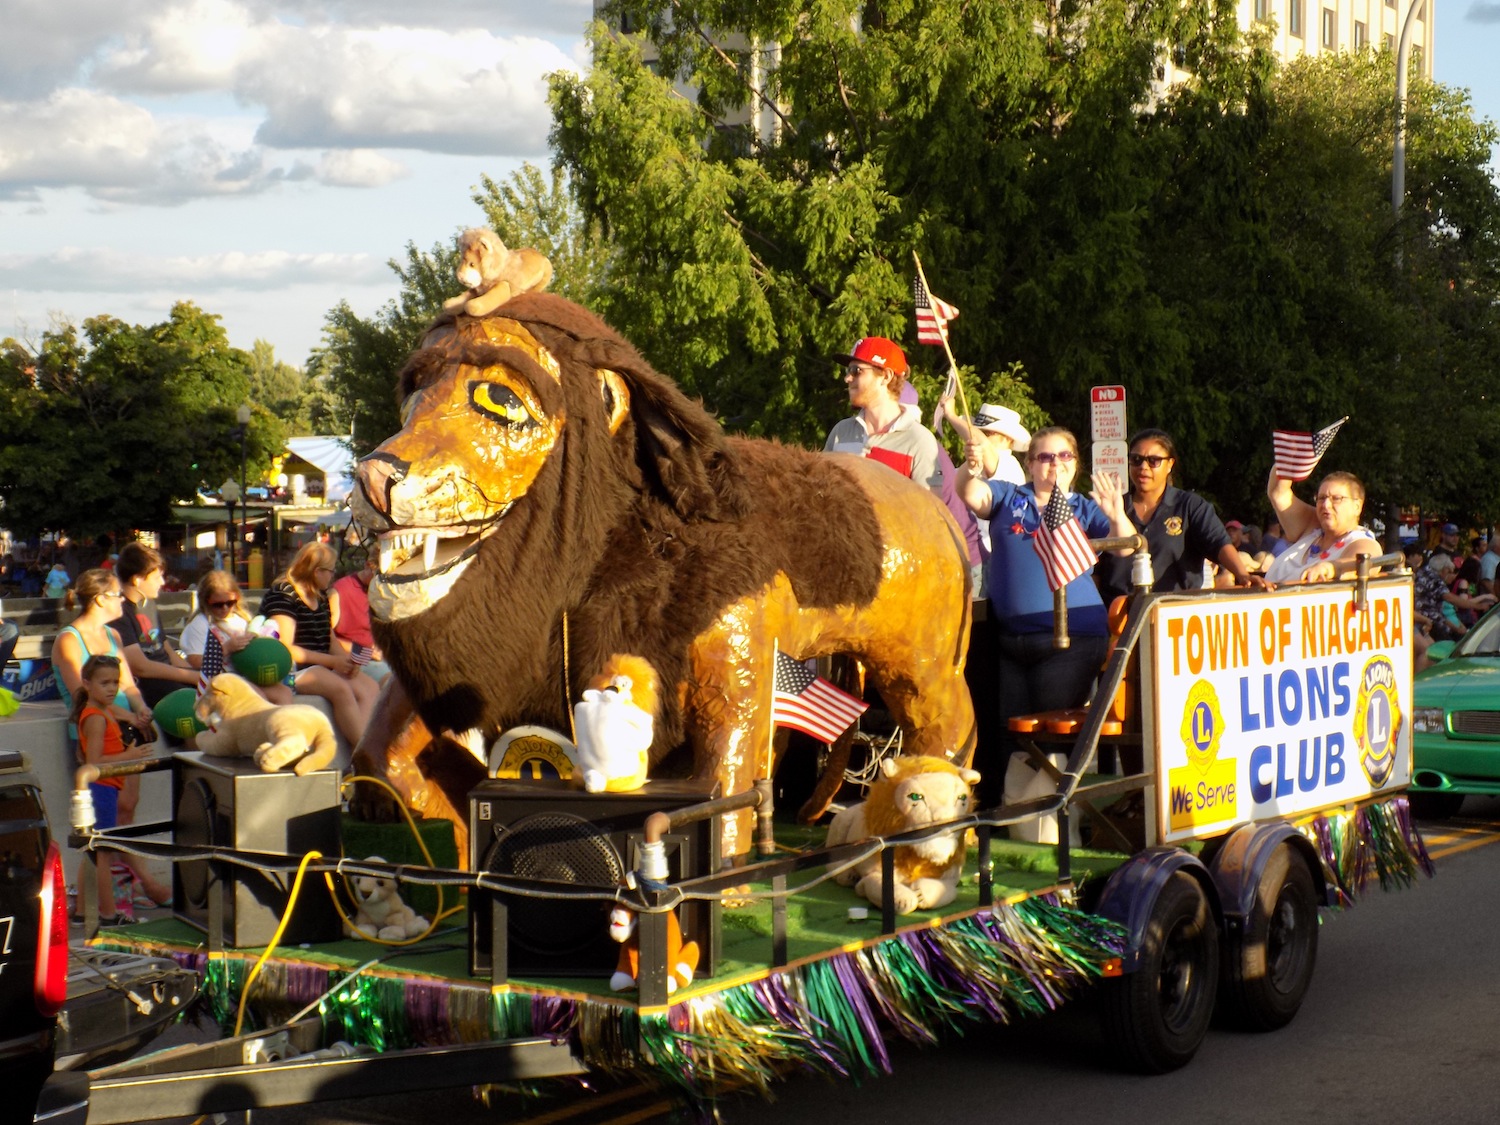 The Town of Niagara Lions Club's float in the Canal Fest Parade.